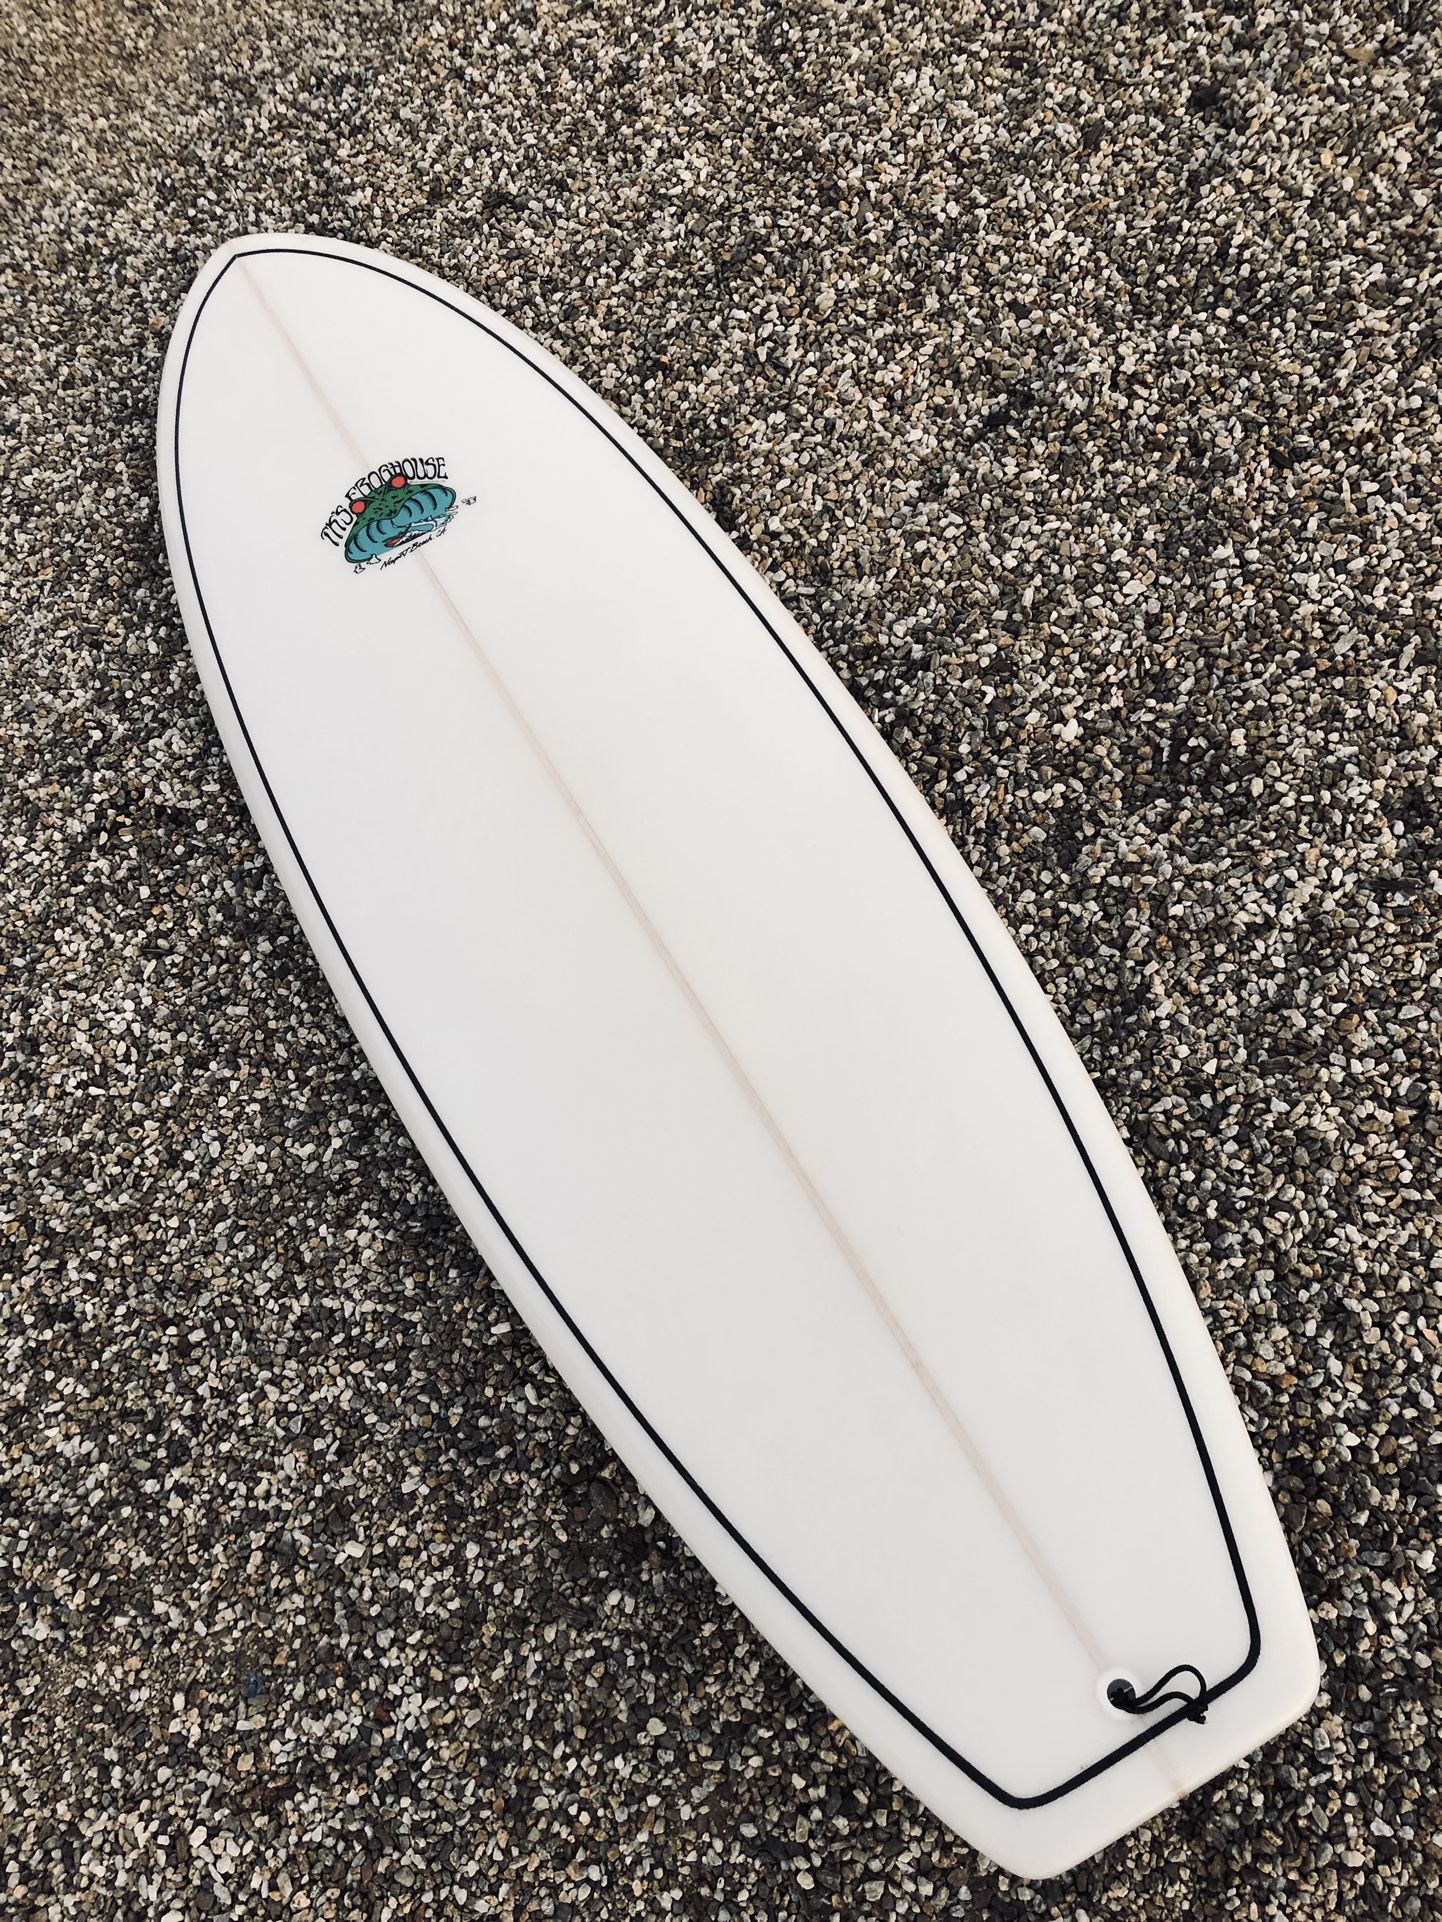 Surfboard Sale, 6’0” Froghouse Surfboard For Sale for Sale in Wildomar, CA  - OfferUp